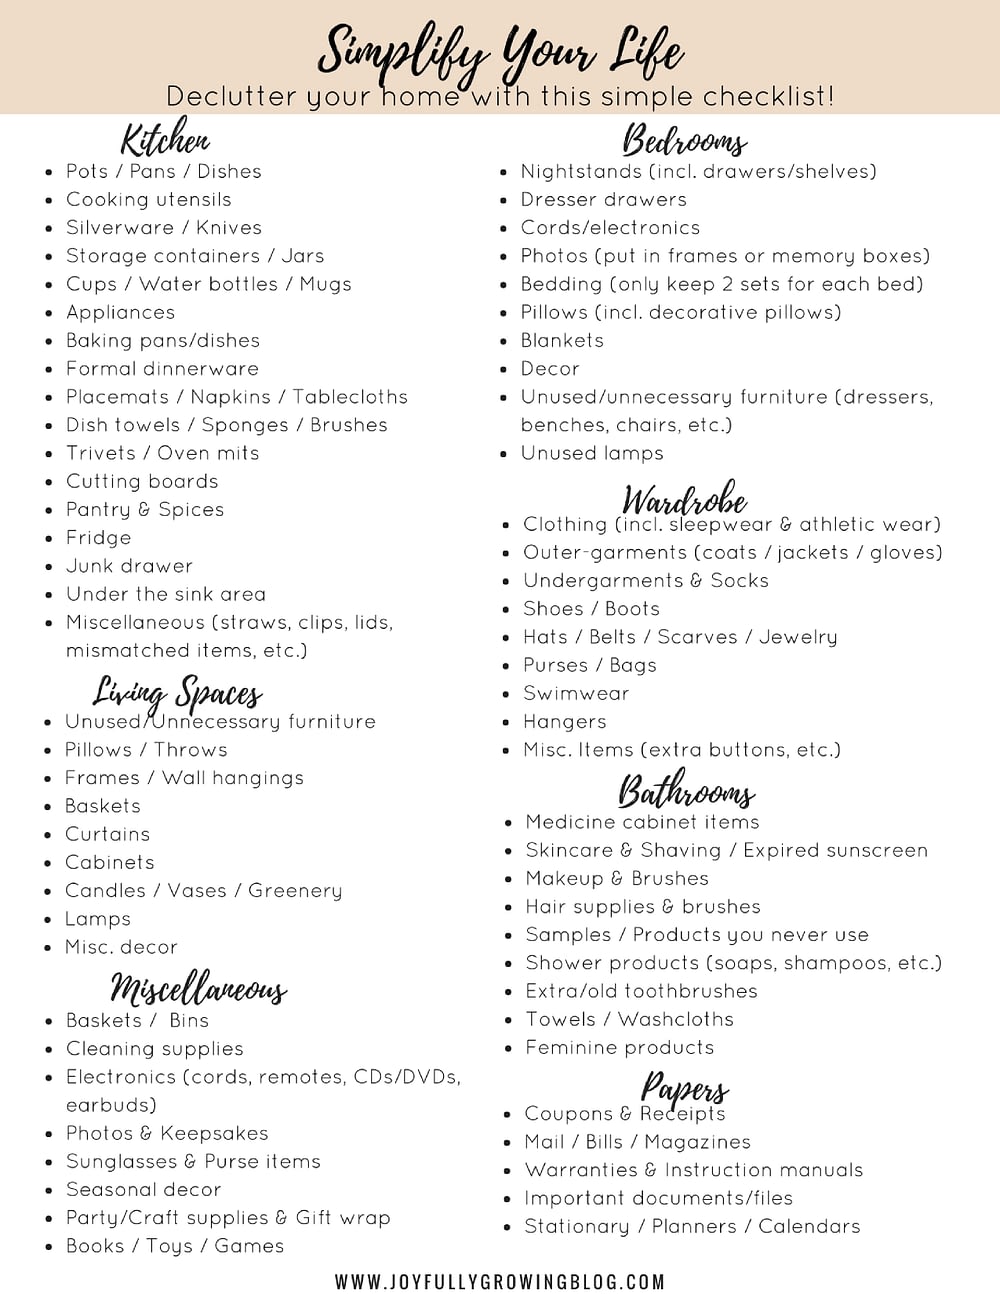 Decluttering Checklist - Declutter your home with this simple checklist!